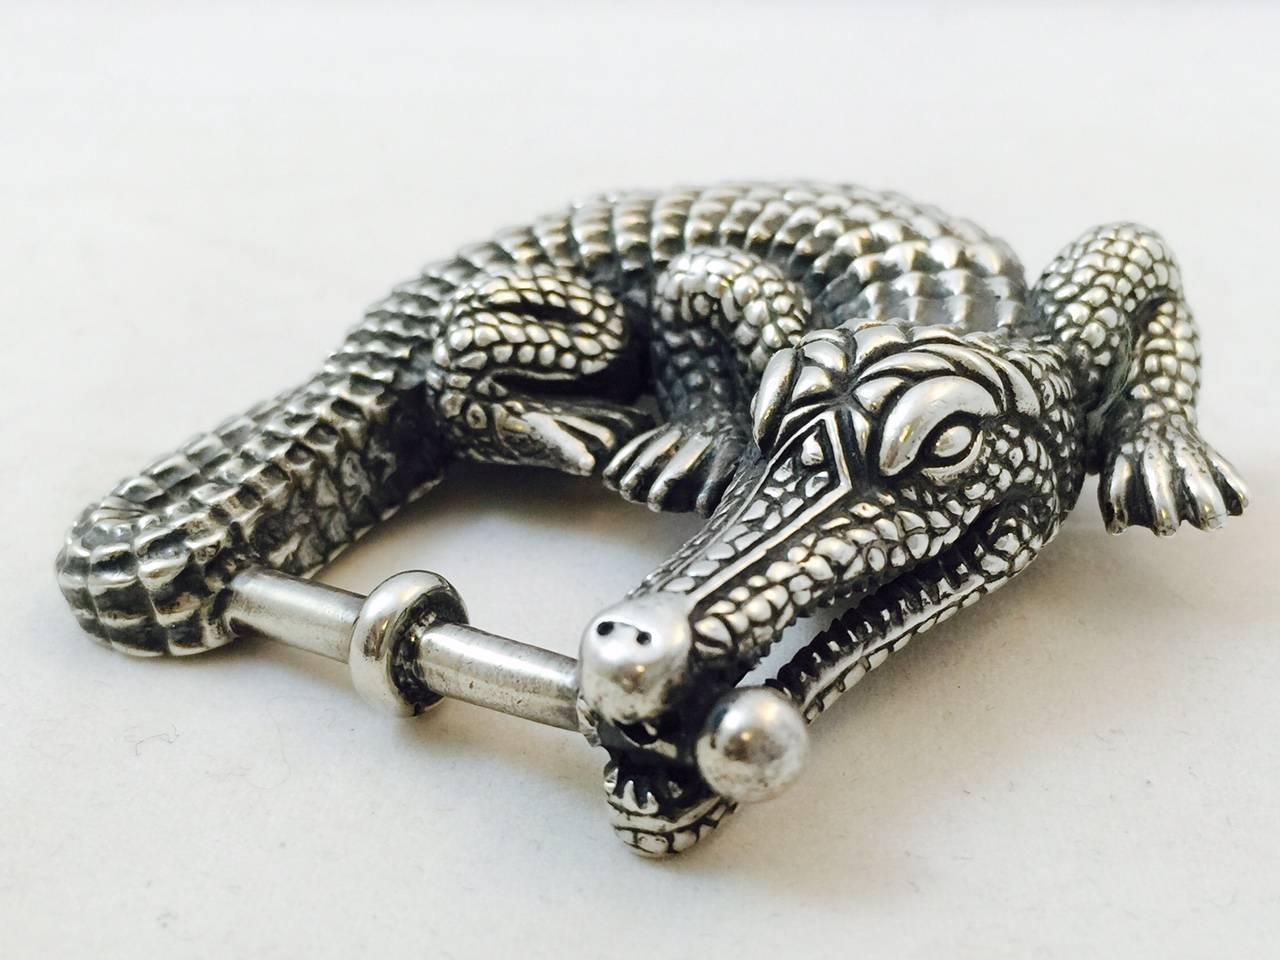 THE ART GOES IN BEFORE THE NAME GOES ON ™.  This has been not only the trade mark of Kieselstein Cord but their consistent design mantra.  An iconic sterling silver alligator serves as a fabulous buckle for your favorite 1